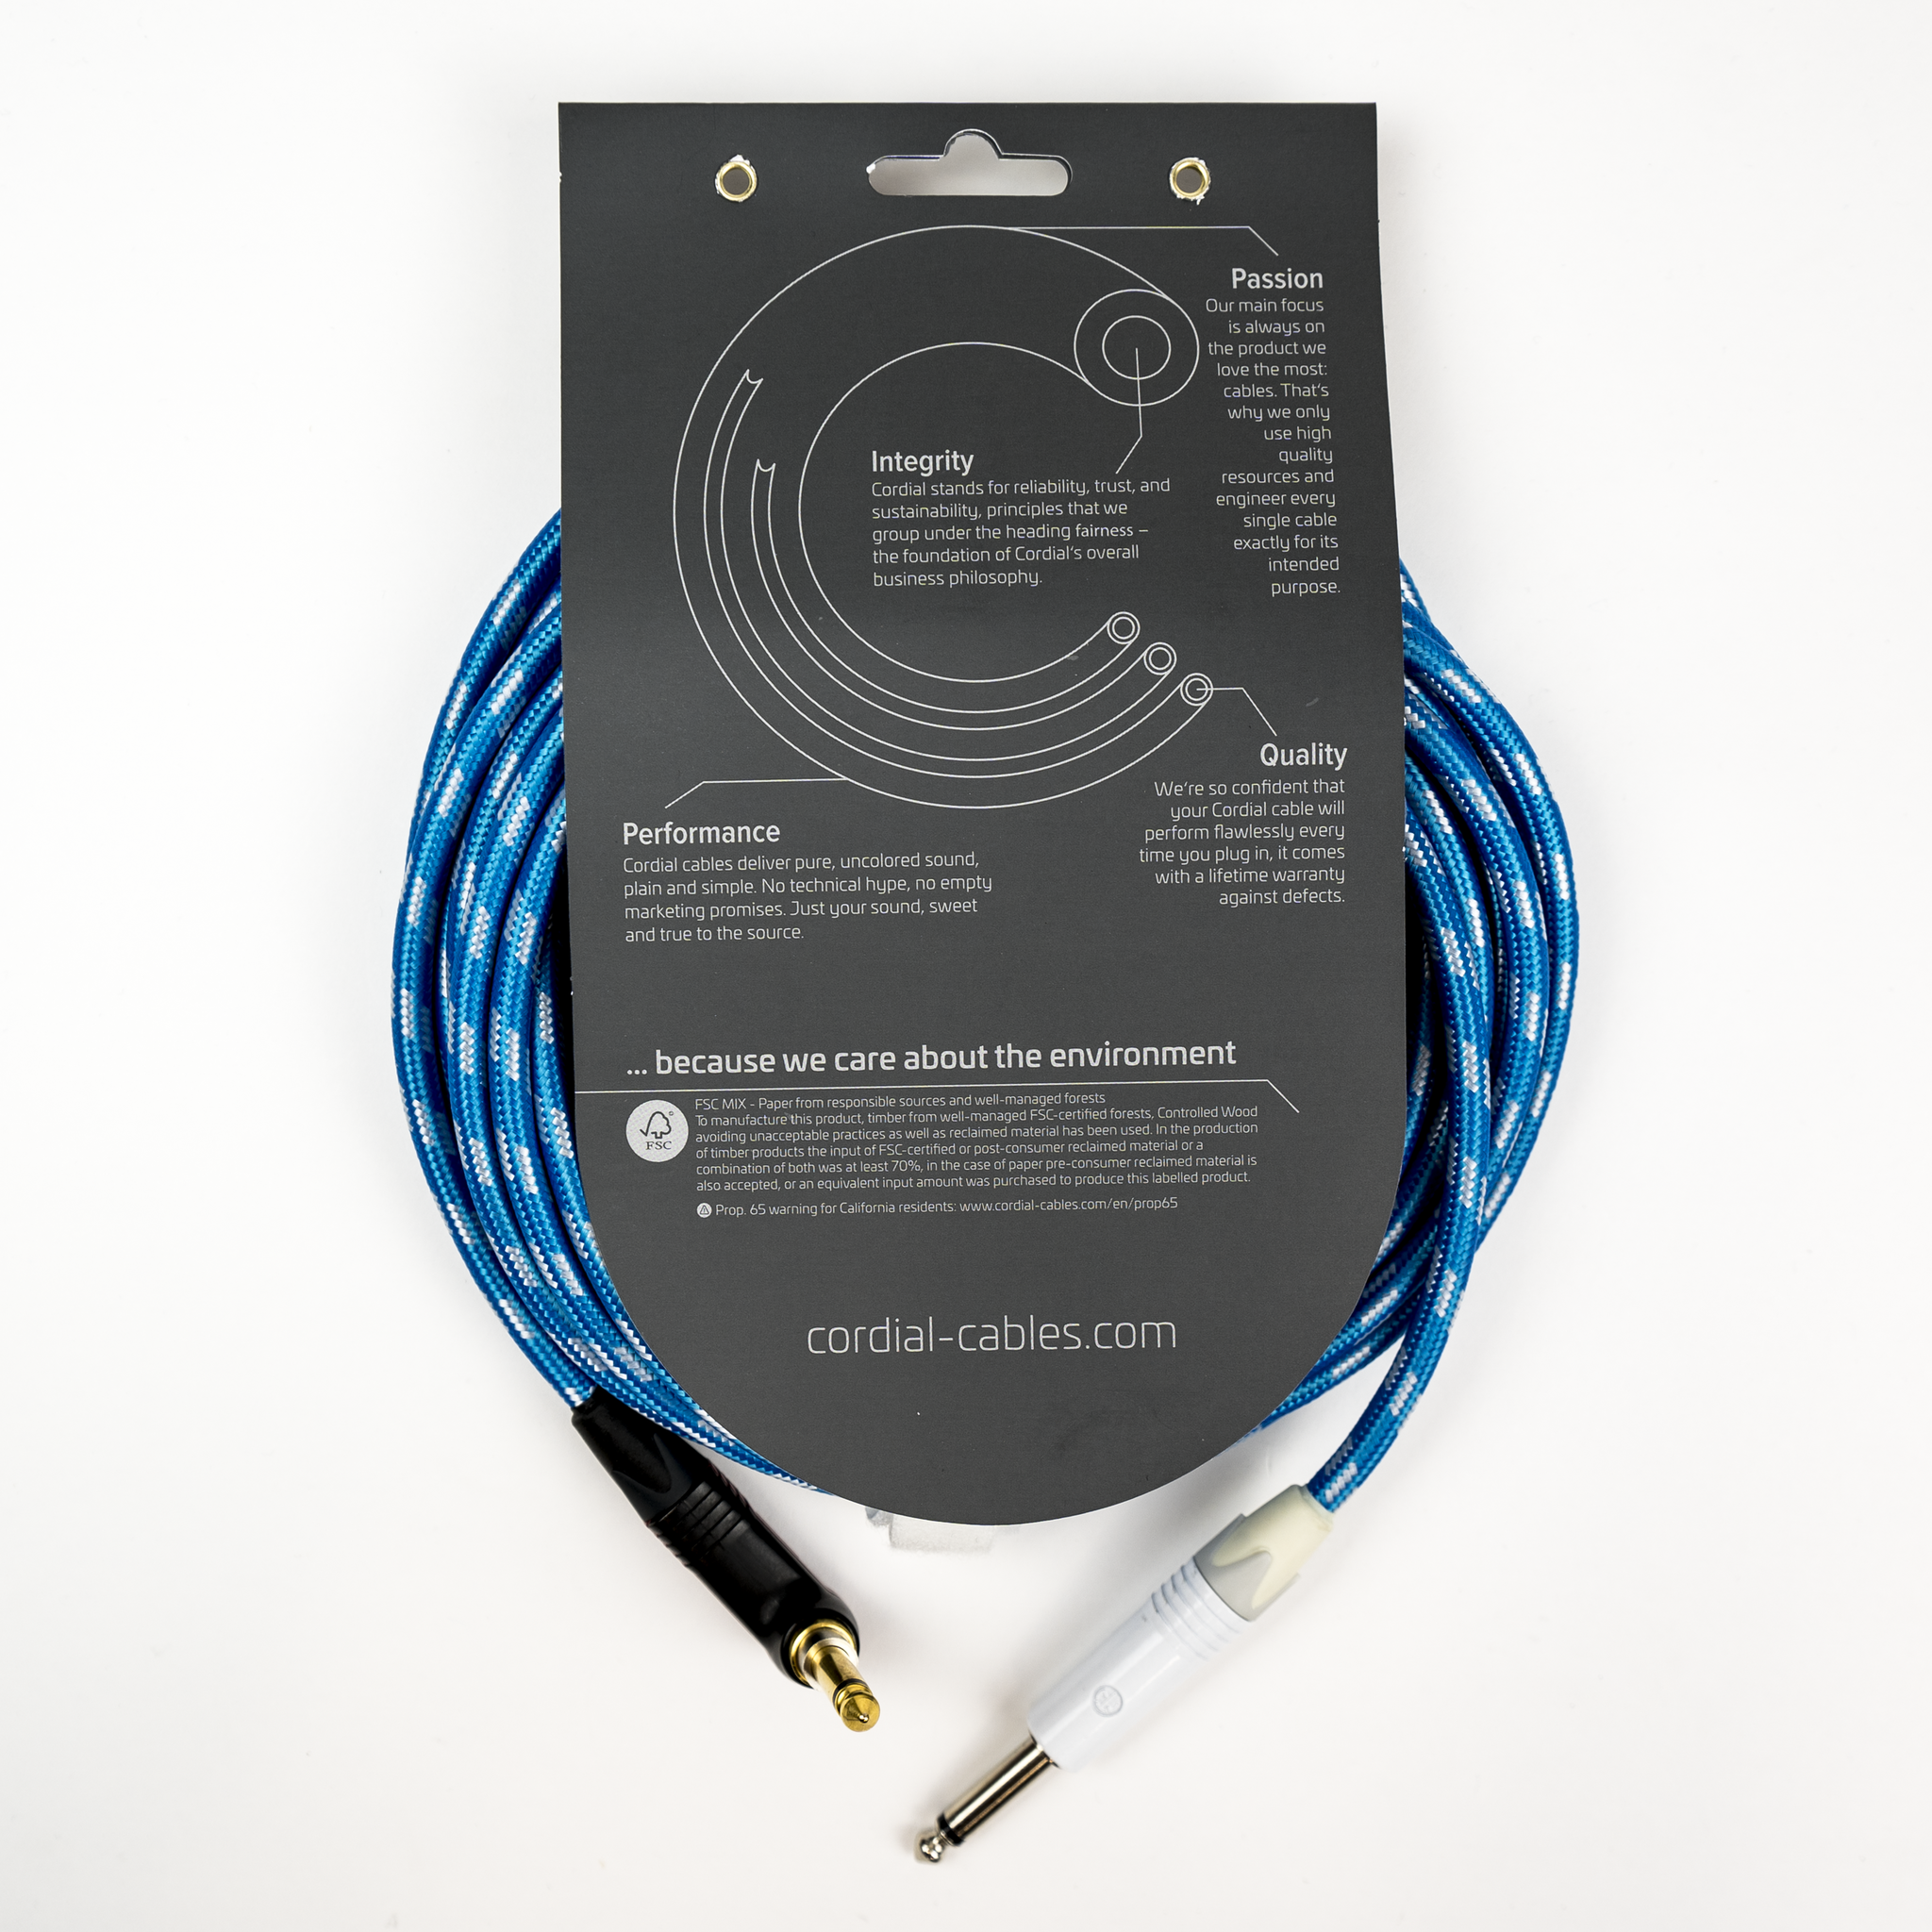 Cordial Cables Premium Instrument White/Blue Sky Textile Cable with Neutrik Silent Plug, Peak Series - 10-Foot Cable, 1/4" Straight to 1/4" Right-Angle Phone Plugs, No-Fray Sleeve